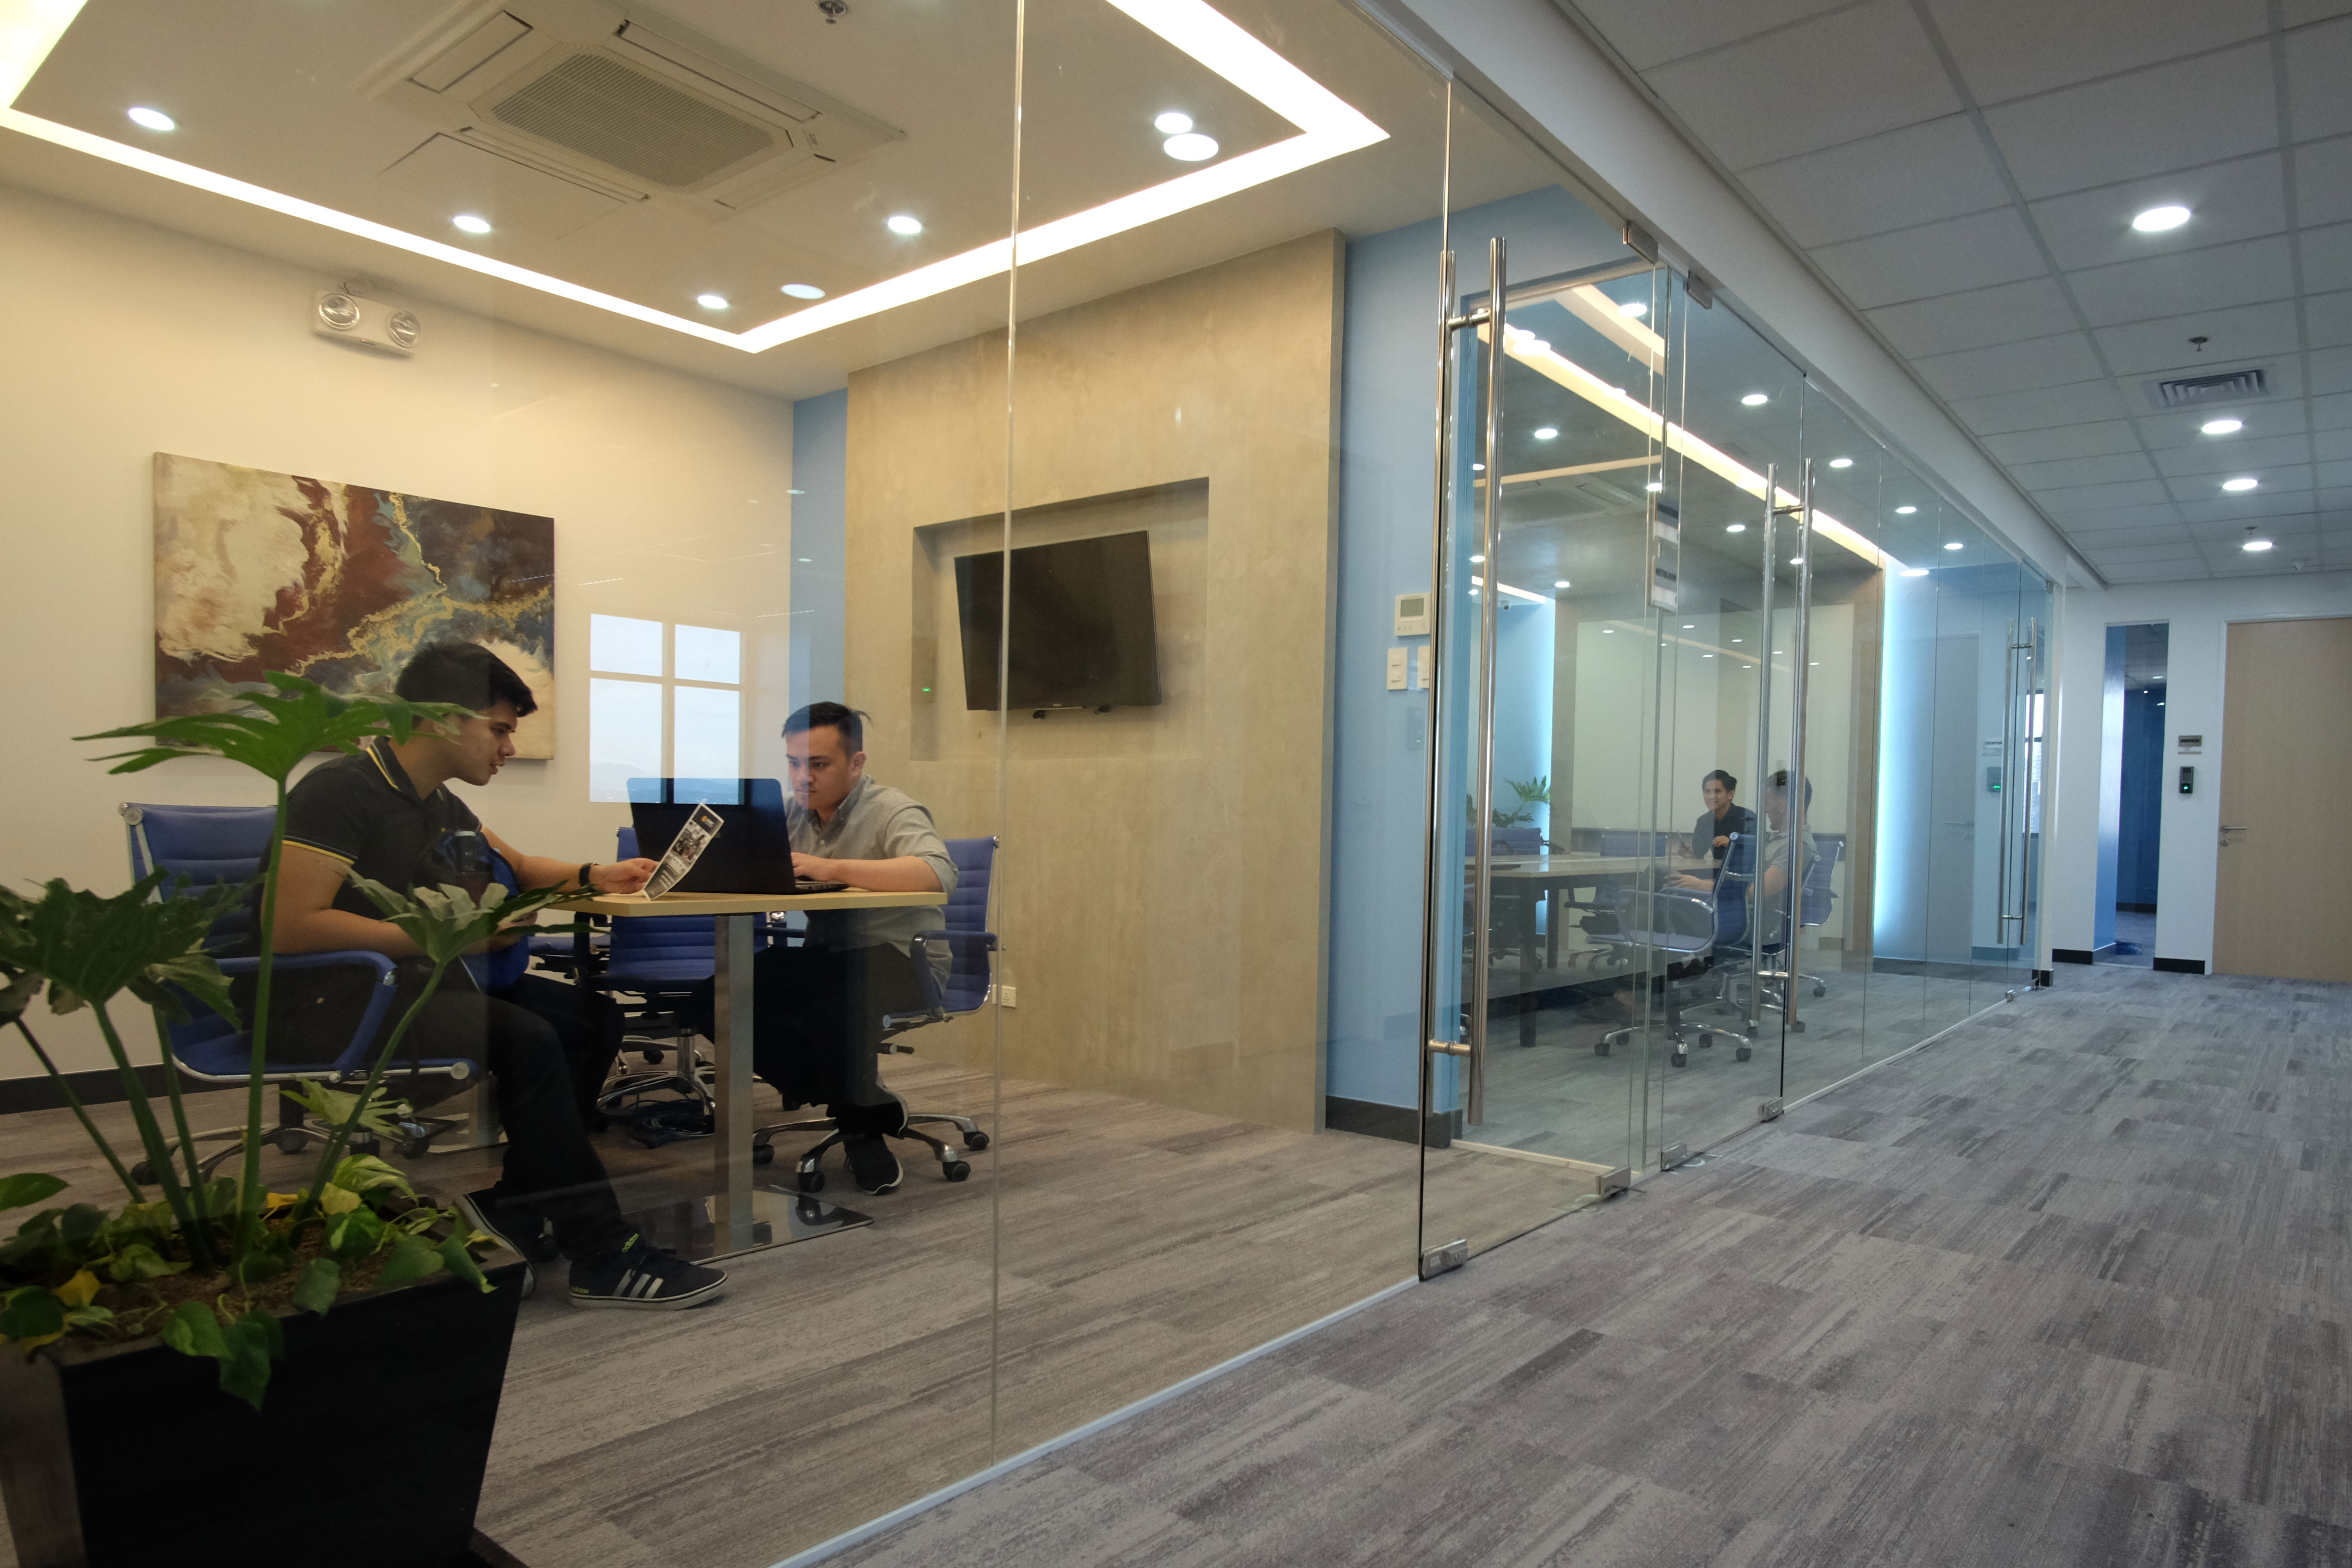 Meeting Rooms in KMC Private Office for rent in Cyber Sigma, Taguig, Manila, Philippines - EpicSpace